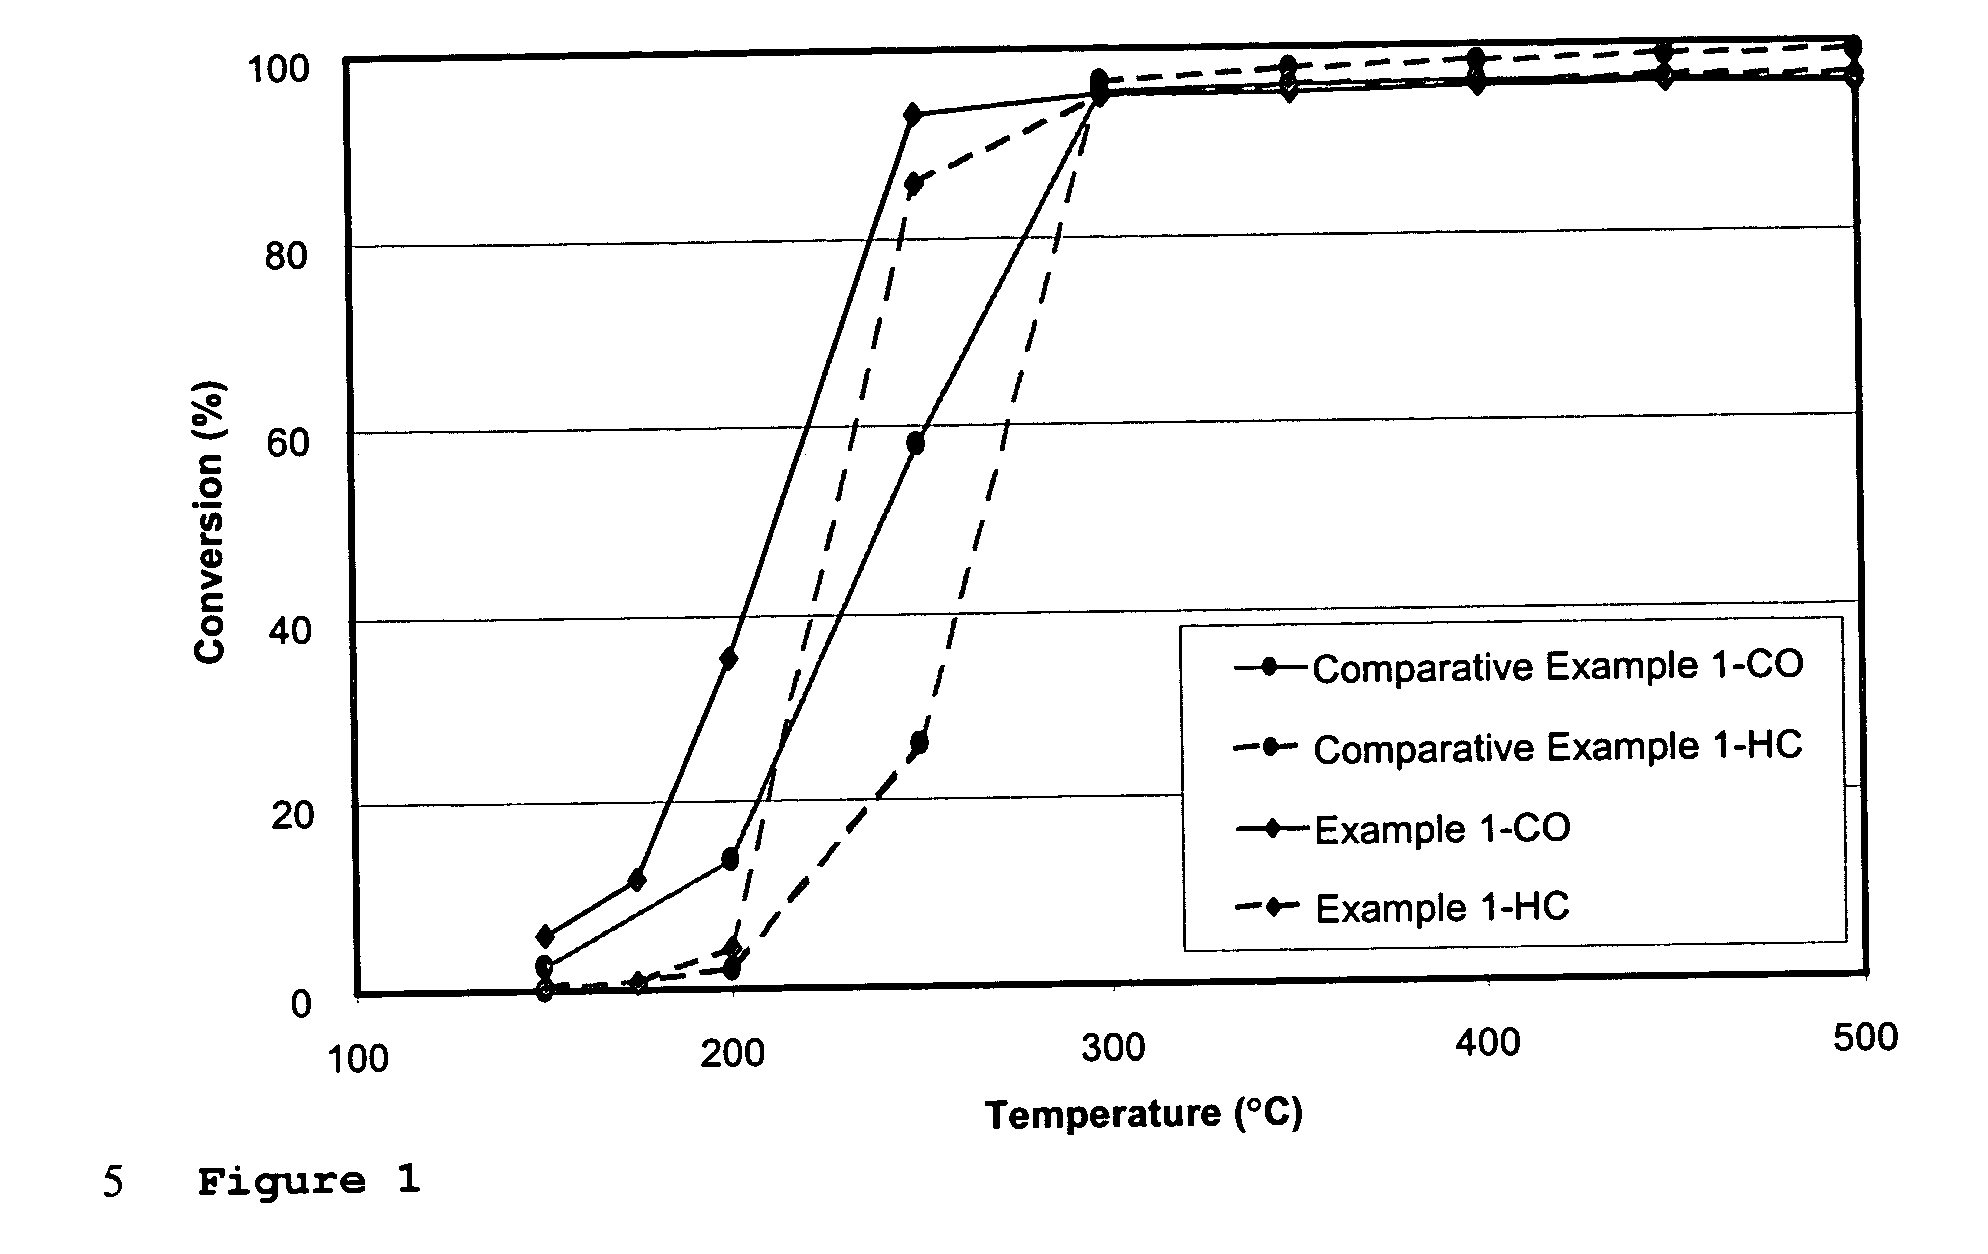 Oxidation catalyst on a substrate utilized for the purification of exhaust gases